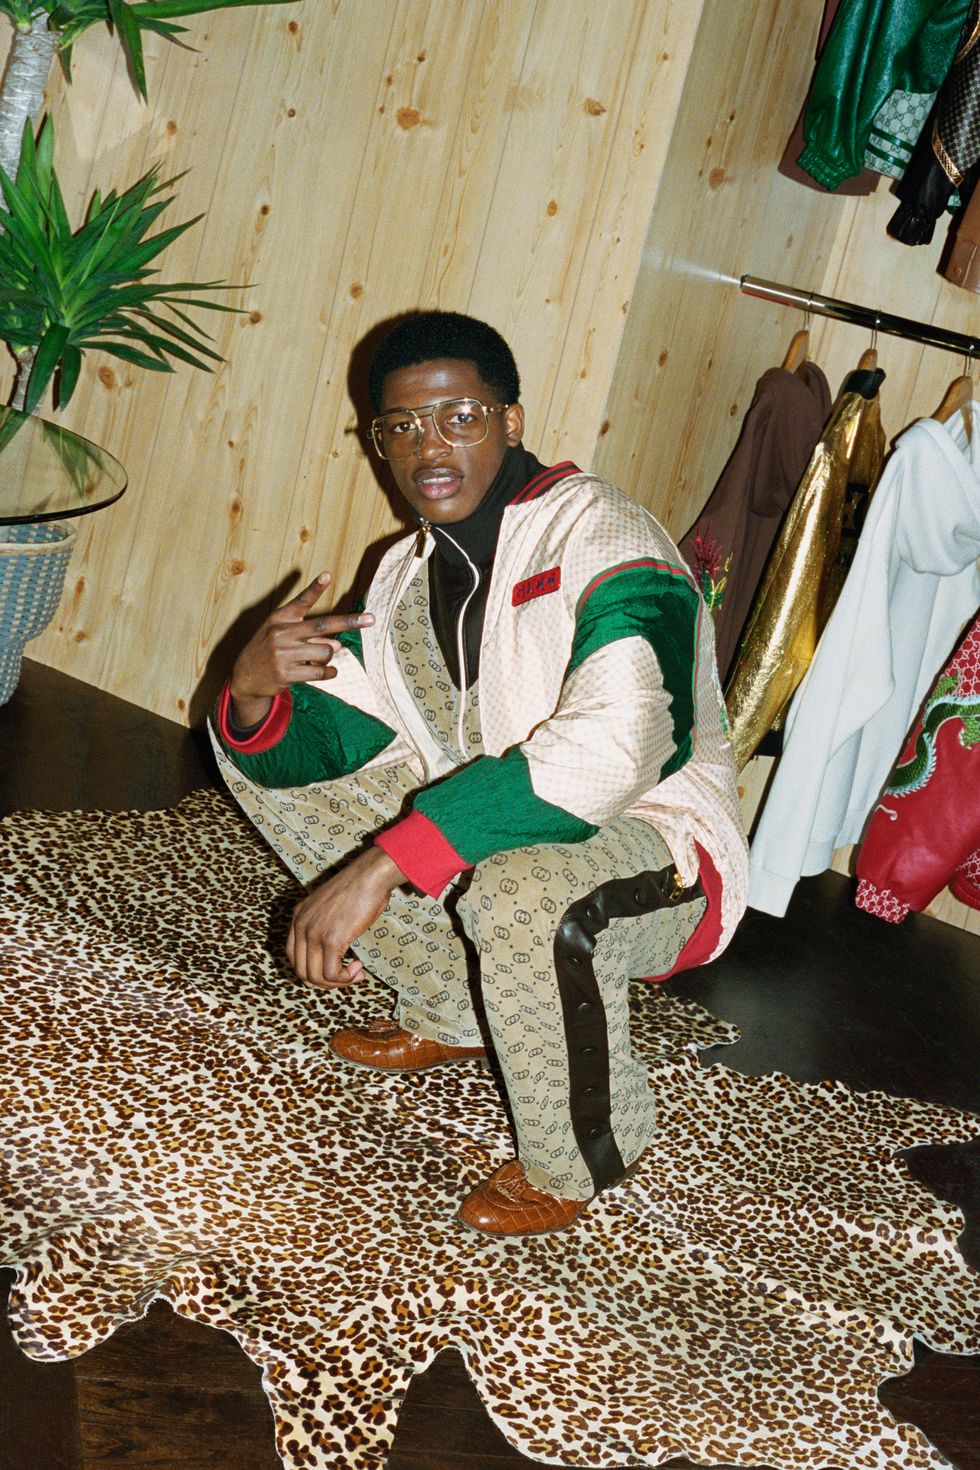 The Gucci x Dapper Dan Clothing Collection Is Finally Available